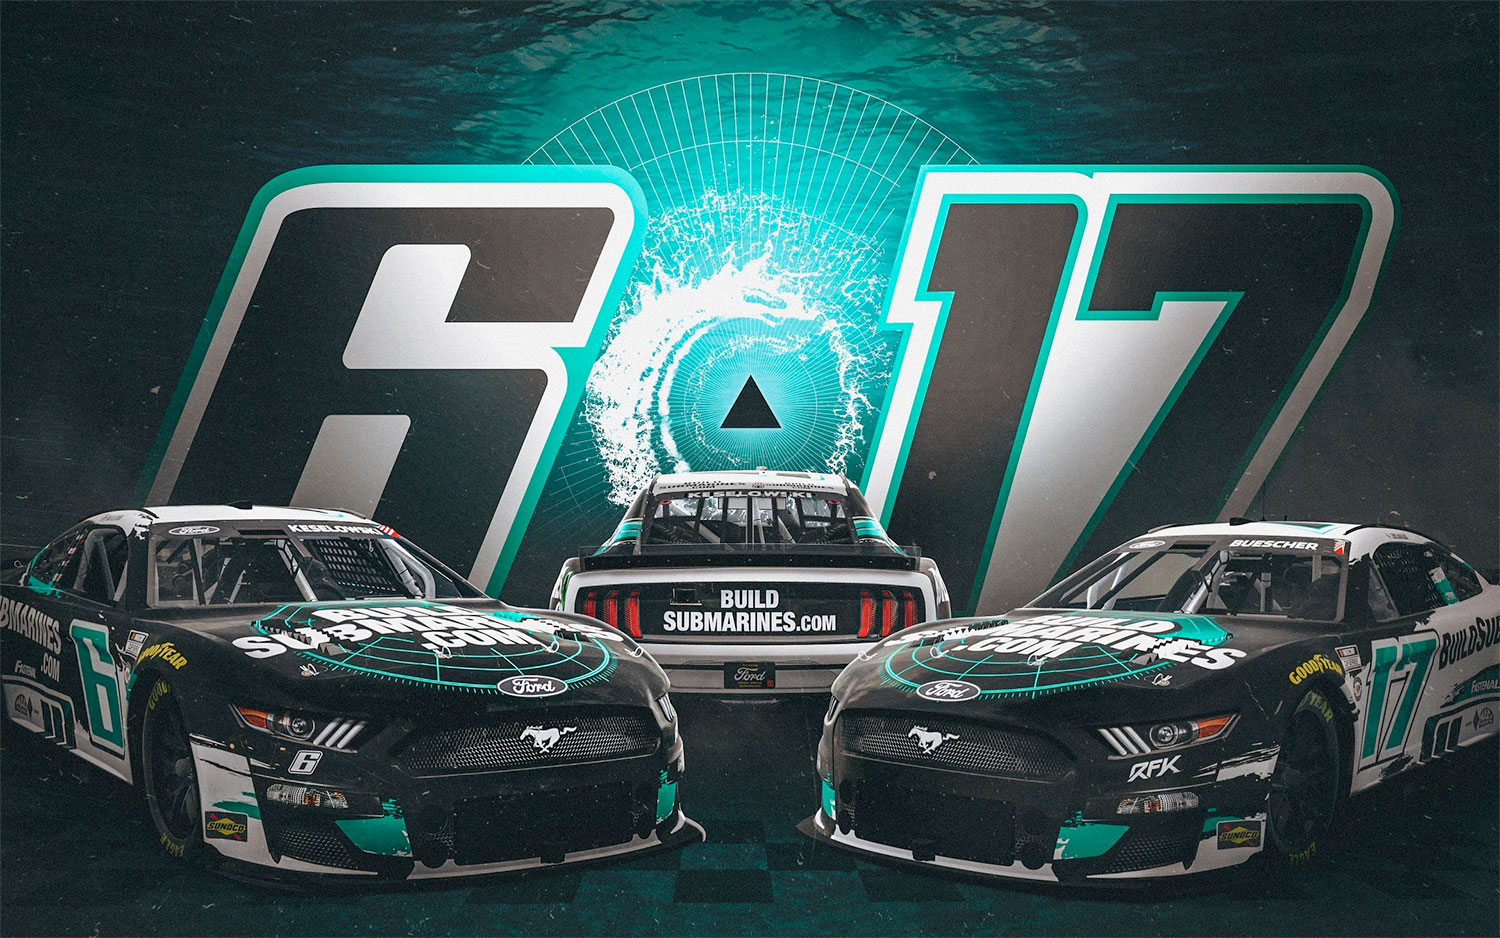 Graphic featuring two racecars facing each other and one racecar with its rear bumper presented between them. The numbers 6 and 17 are featured in the background.